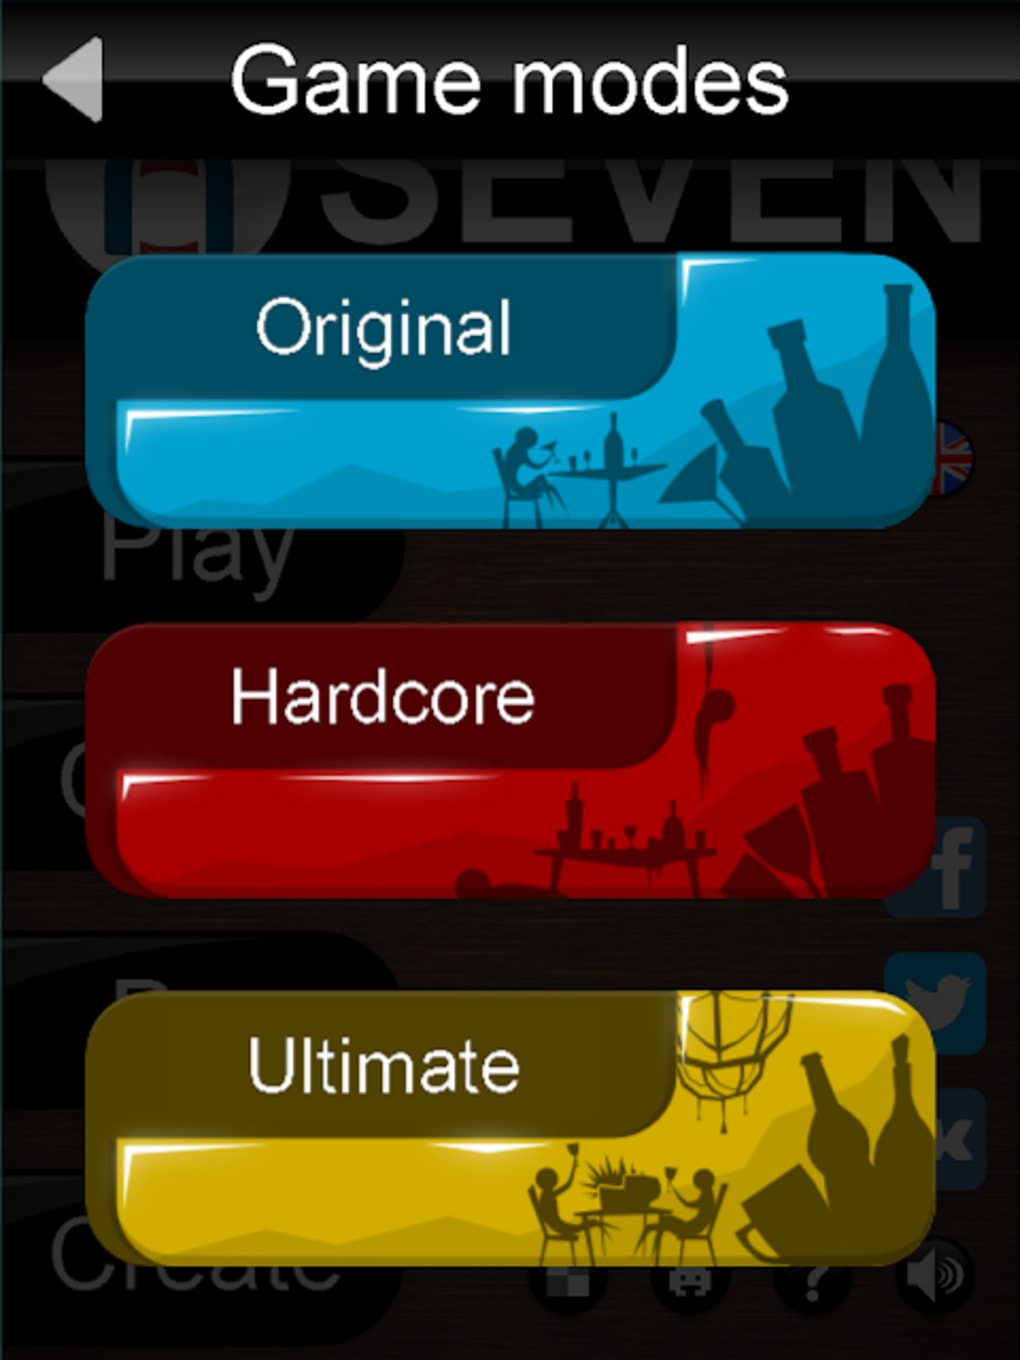 Seven Drinking Game APK for Android - Download